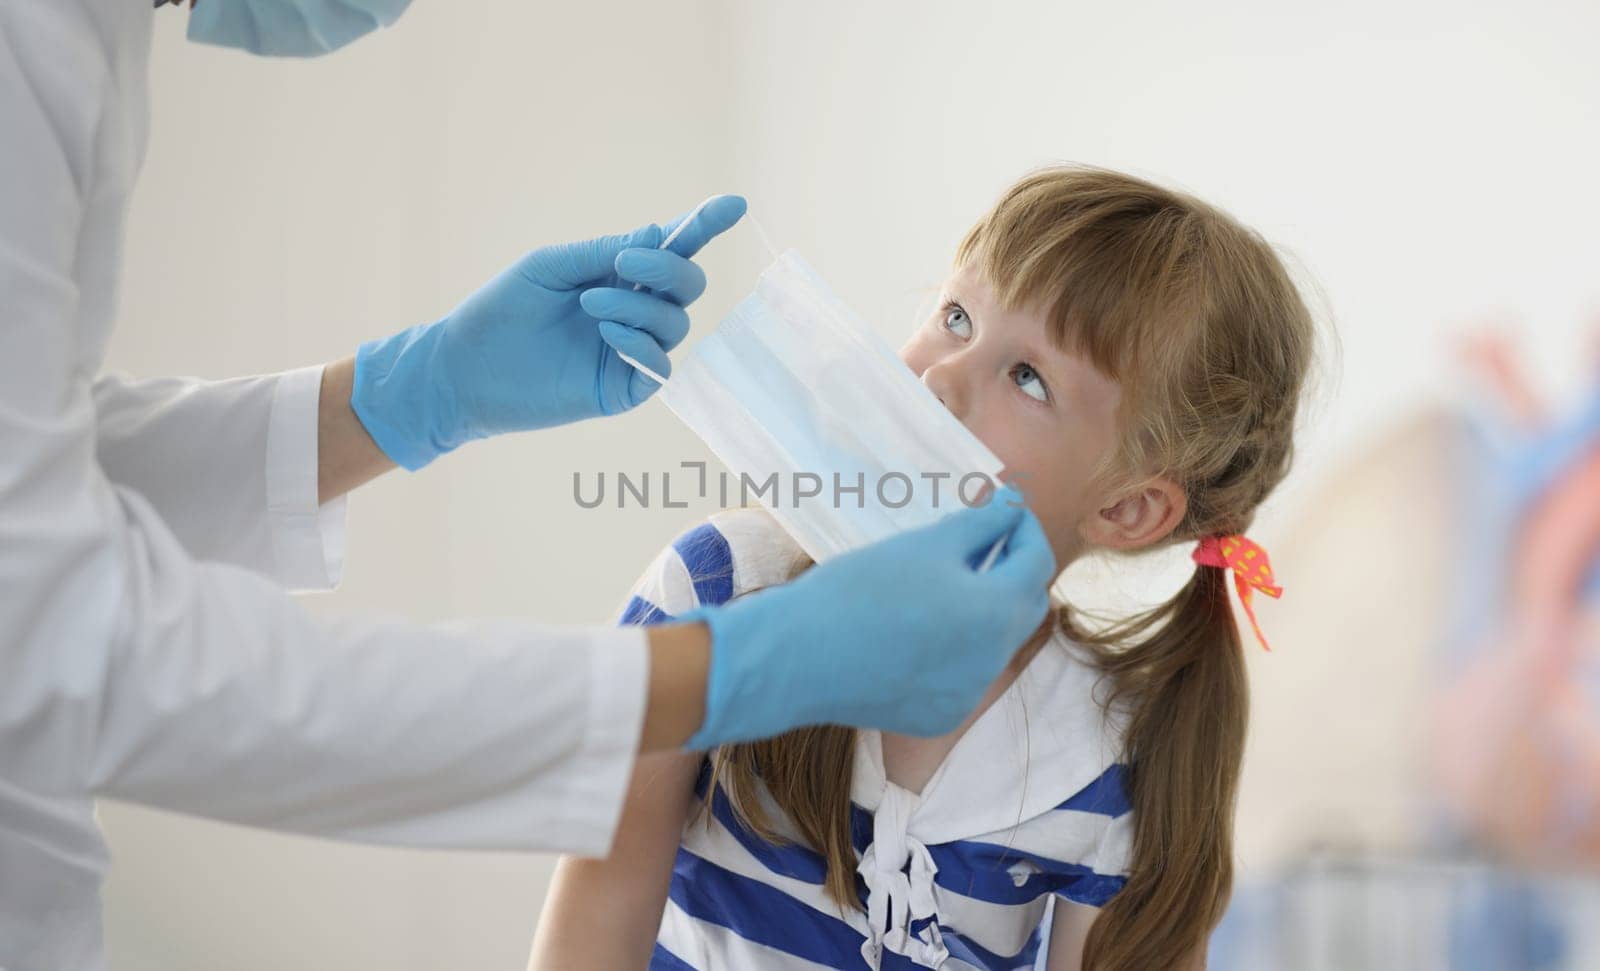 Portrait of doctor put face mask on kid face to protect from virus spread. Little girl sit in hospital and get checkup. Medicine, covid prevention concept